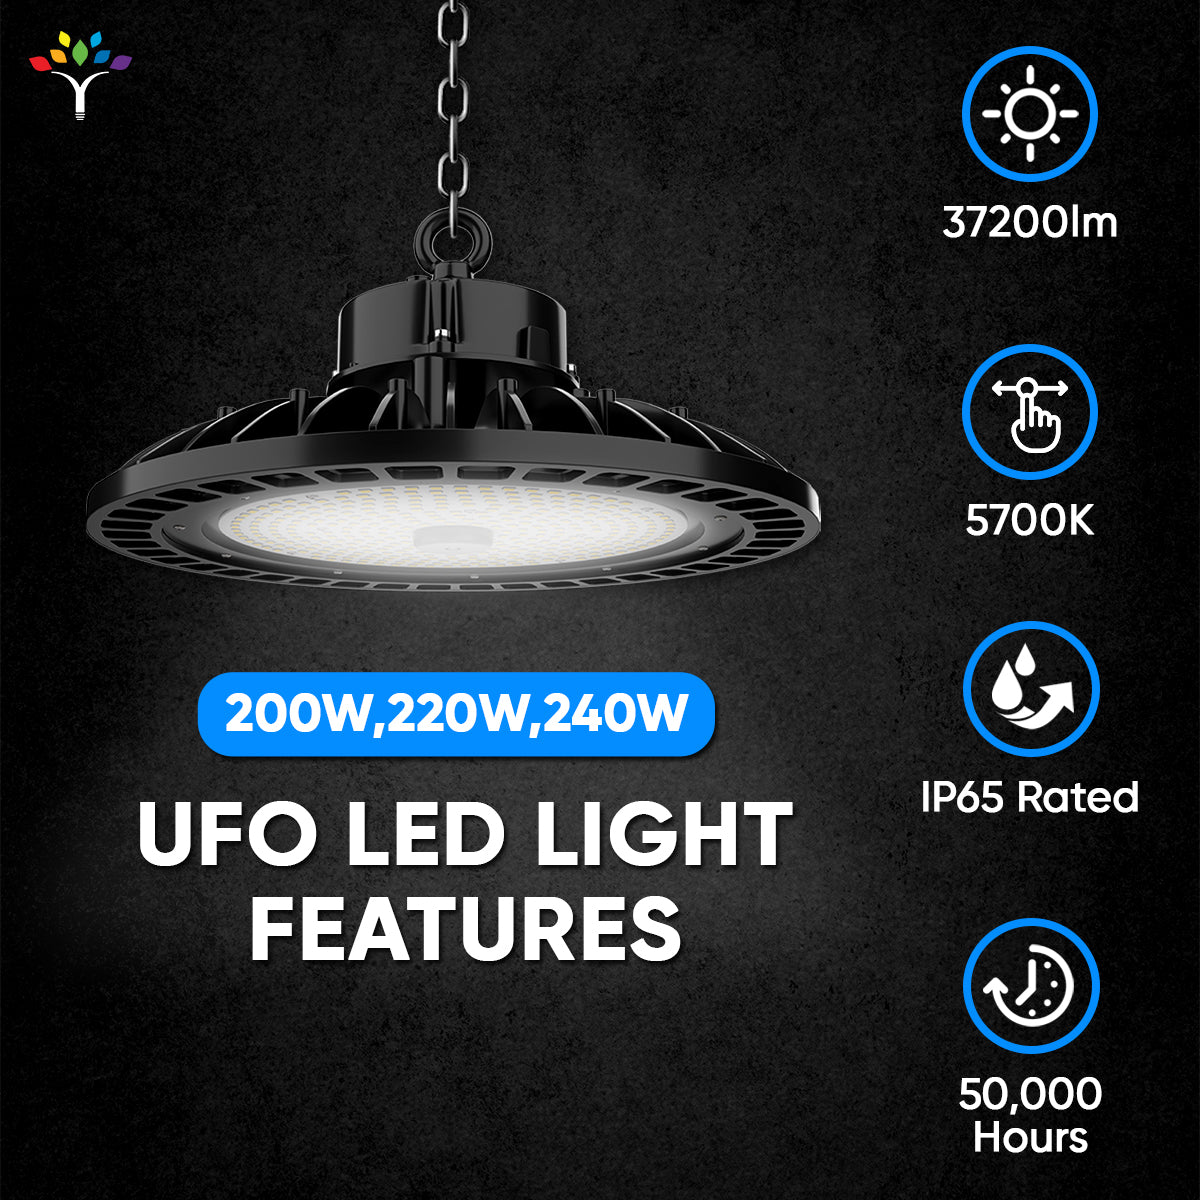 UFO LED High Bay Light, 240W/220W/200W Wattage Adjustable, 5700K 131 LM/W, Waterproof IP65, 1-10V Dimmable, AC277-480V High Voltage, UL, DLC Listed, For Factory, Workshop, Barn, Garage, Commercial Shop, Warehouse, Airport